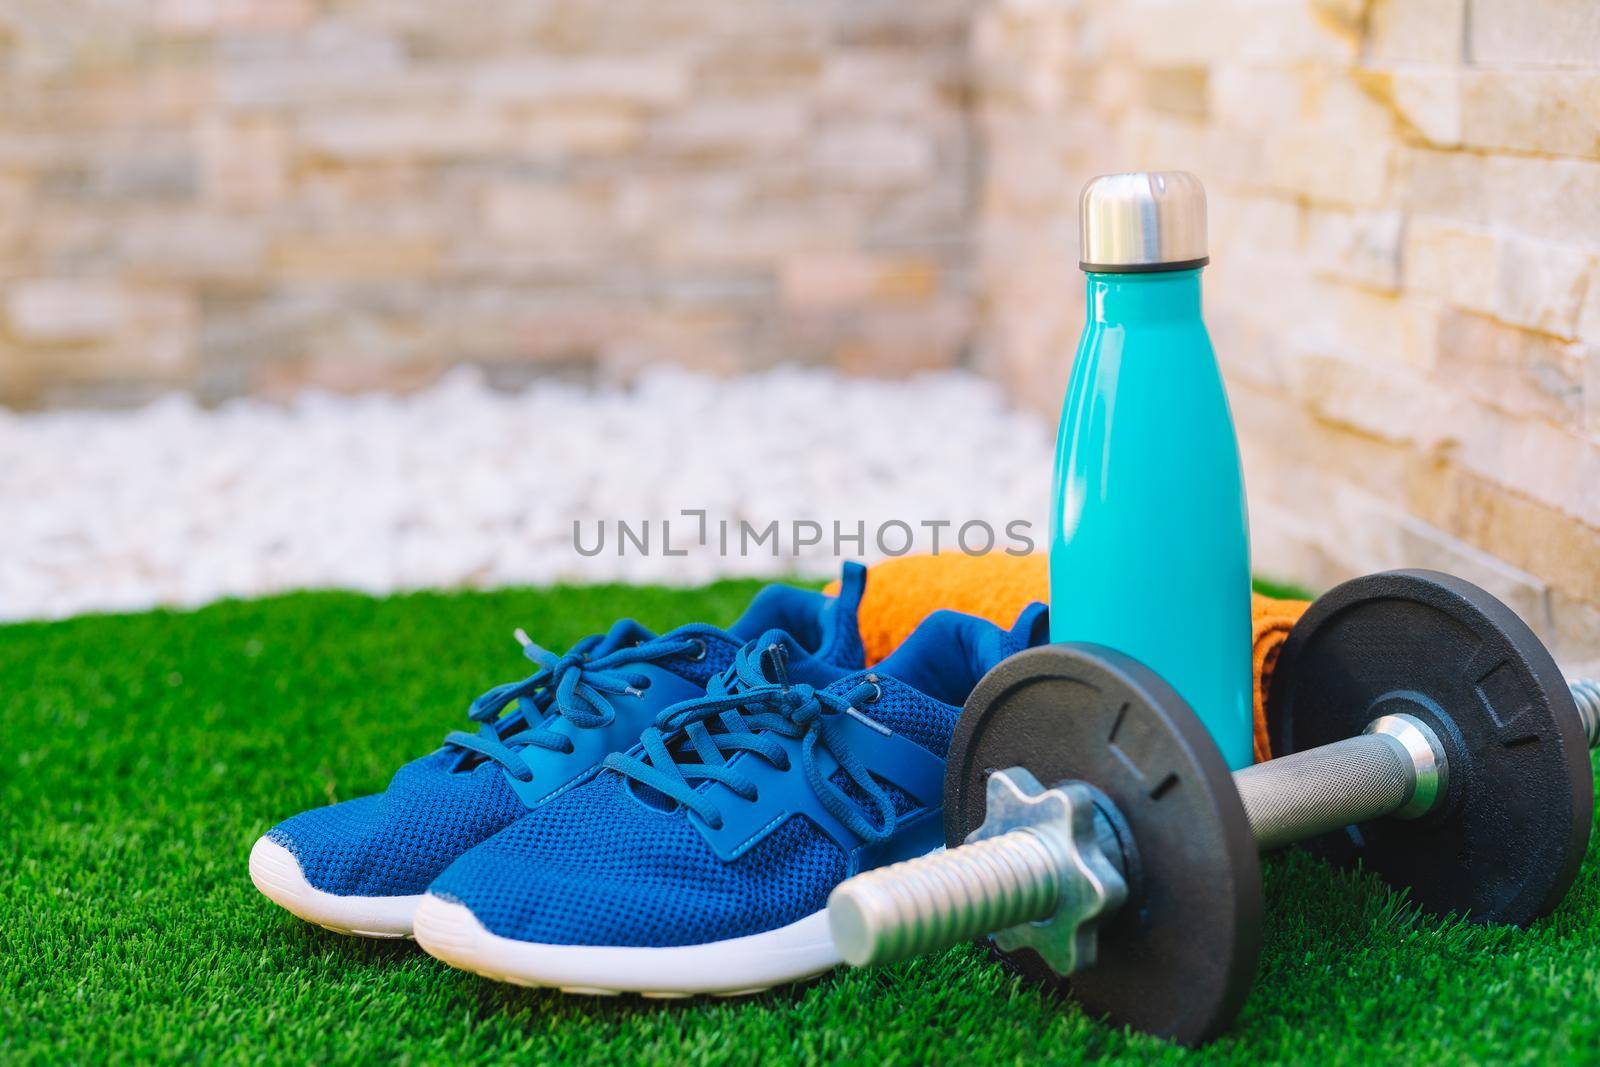 sports equipment in the foreground on green grass in the garden. orange towel, water bottle, weights and blue running shoes. stone wall background. by CatPhotography